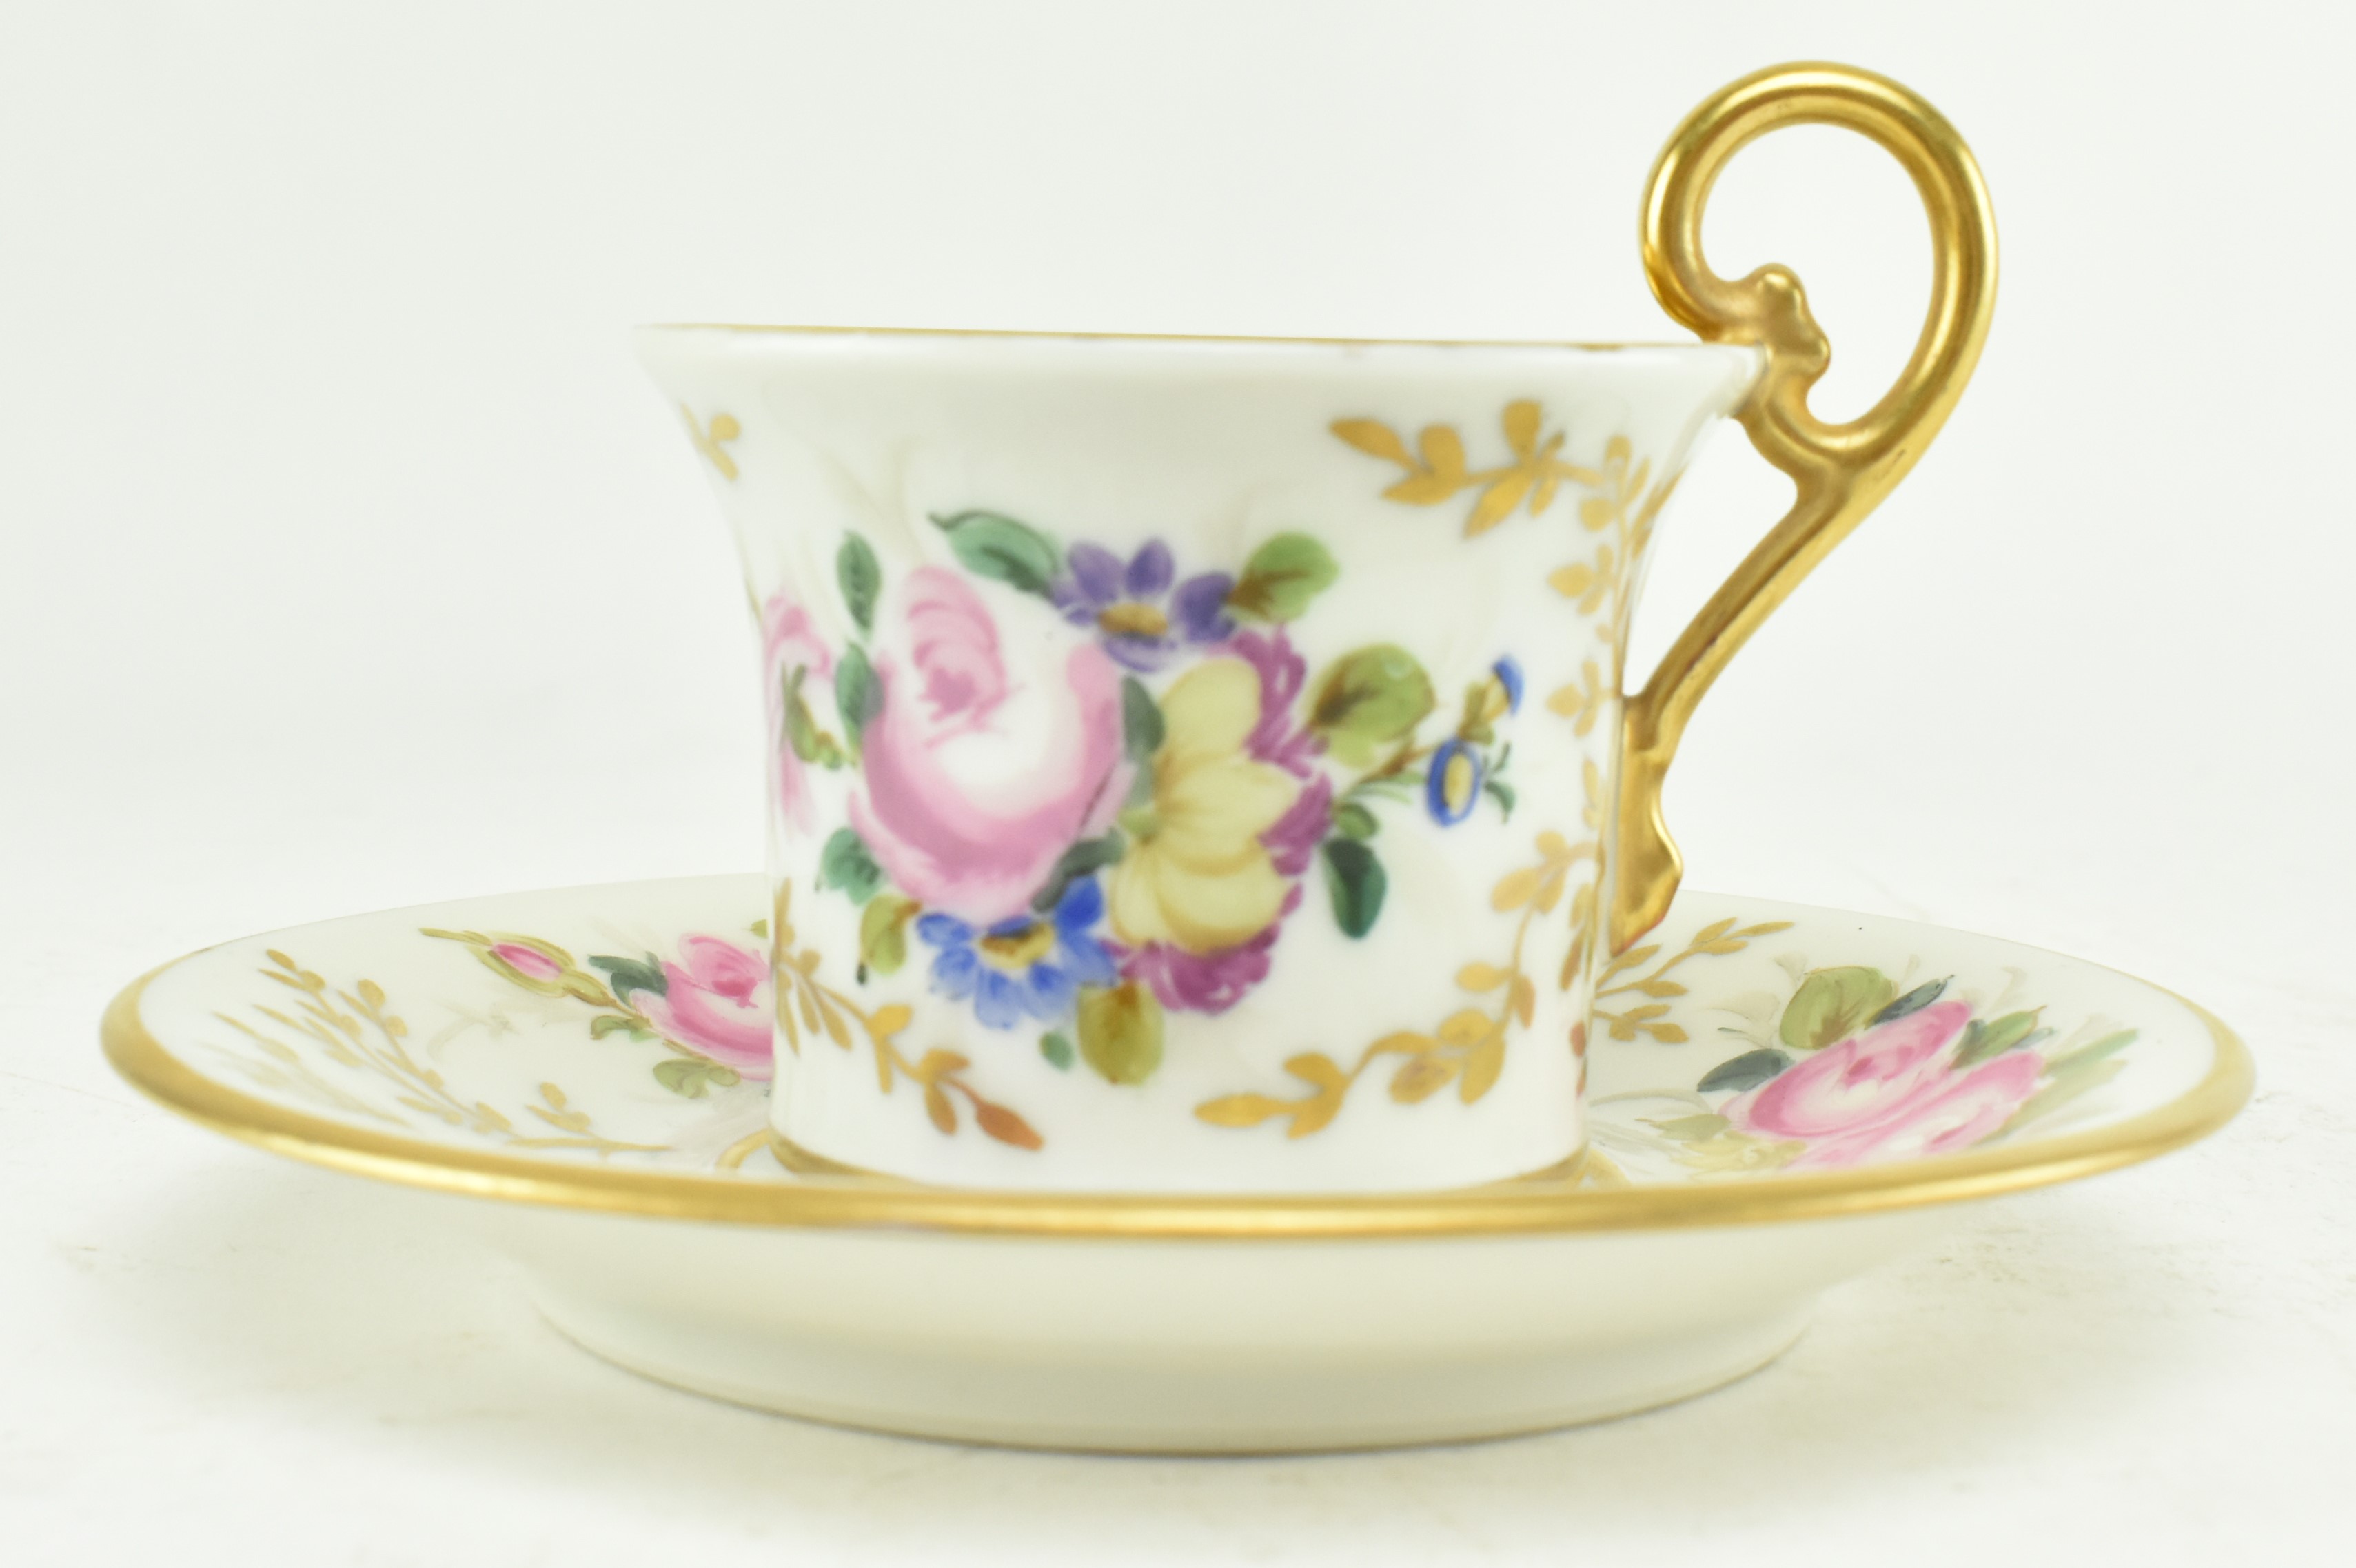 IN THE MANNER OF OF PARIS PORCELAIN - CUP AND SAUCER - Image 3 of 6